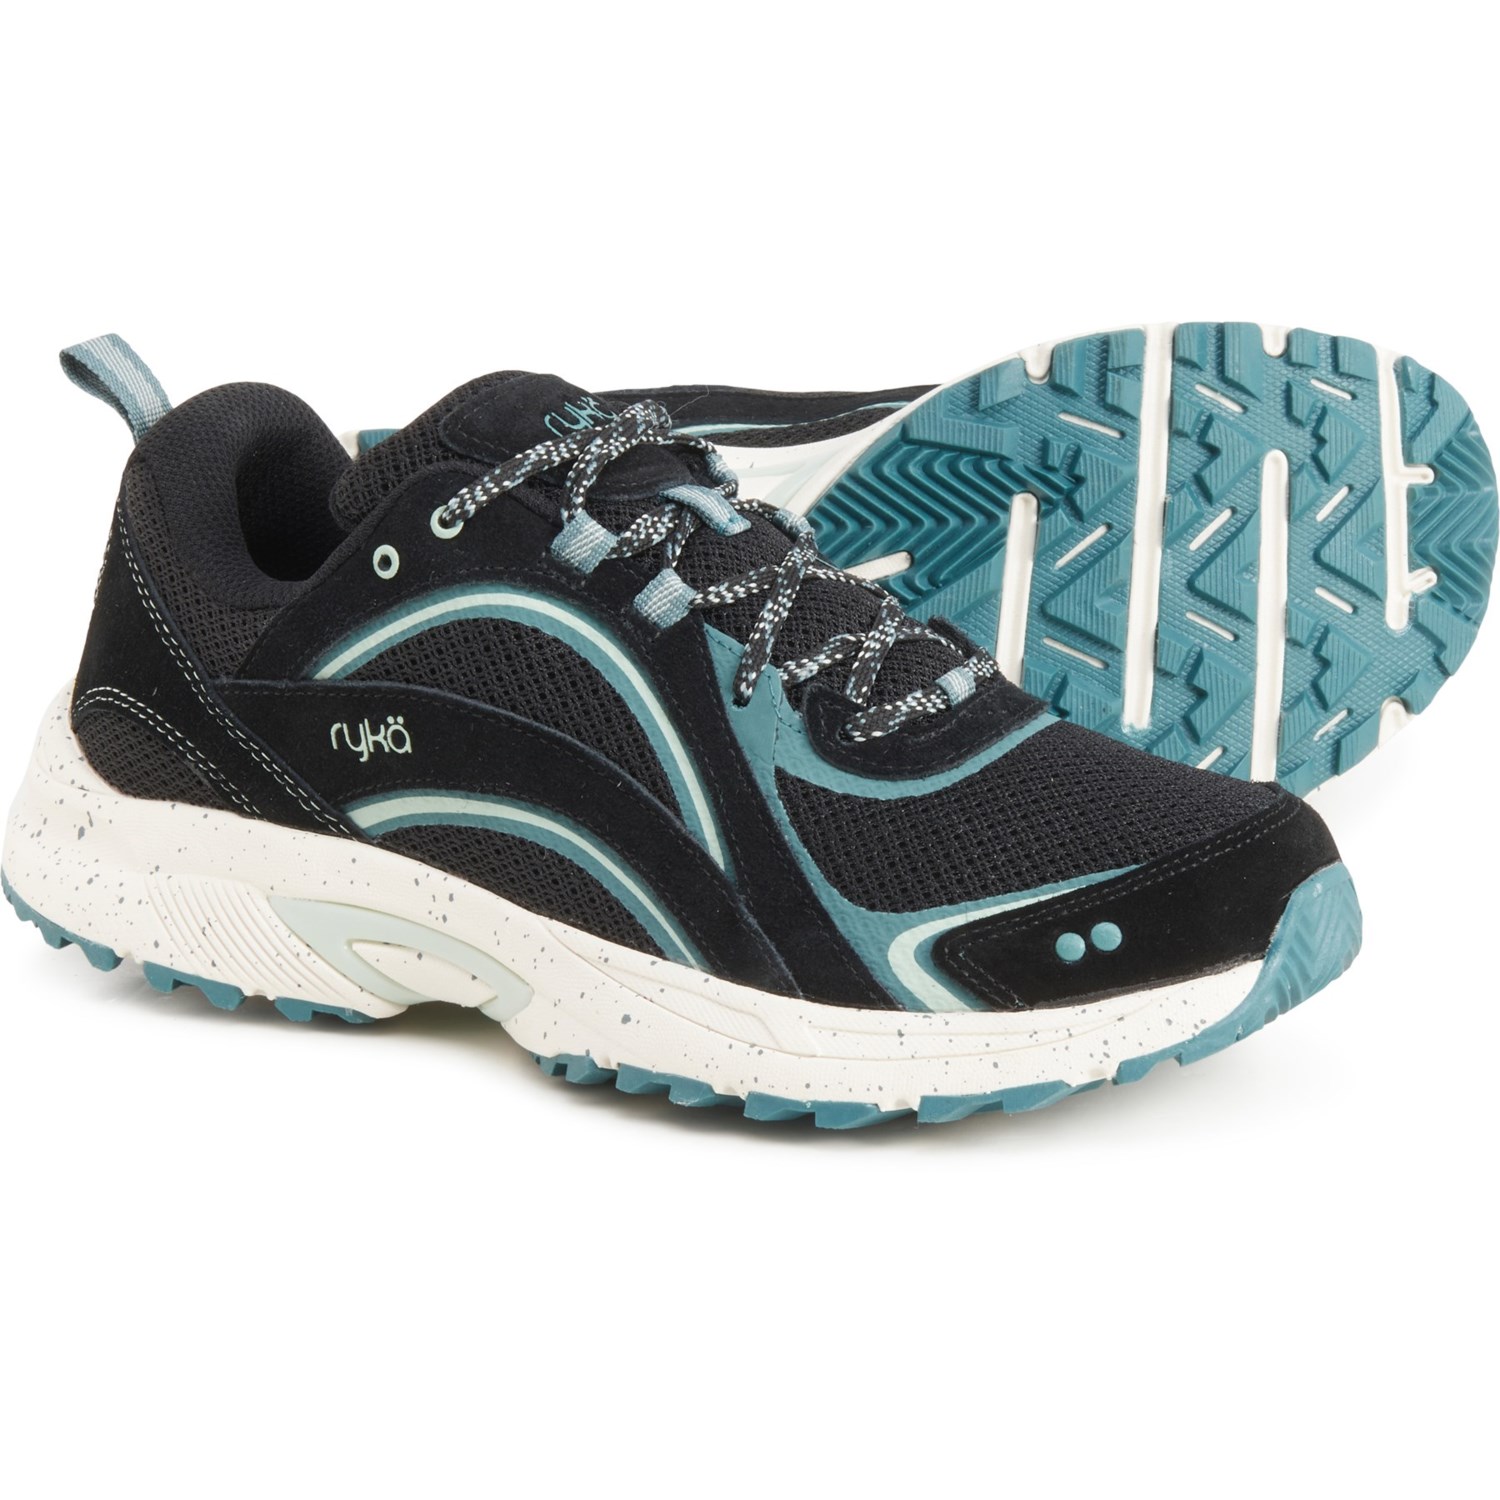 ryka Sky Walk Trail Running Shoes (For Women) - Save 53%